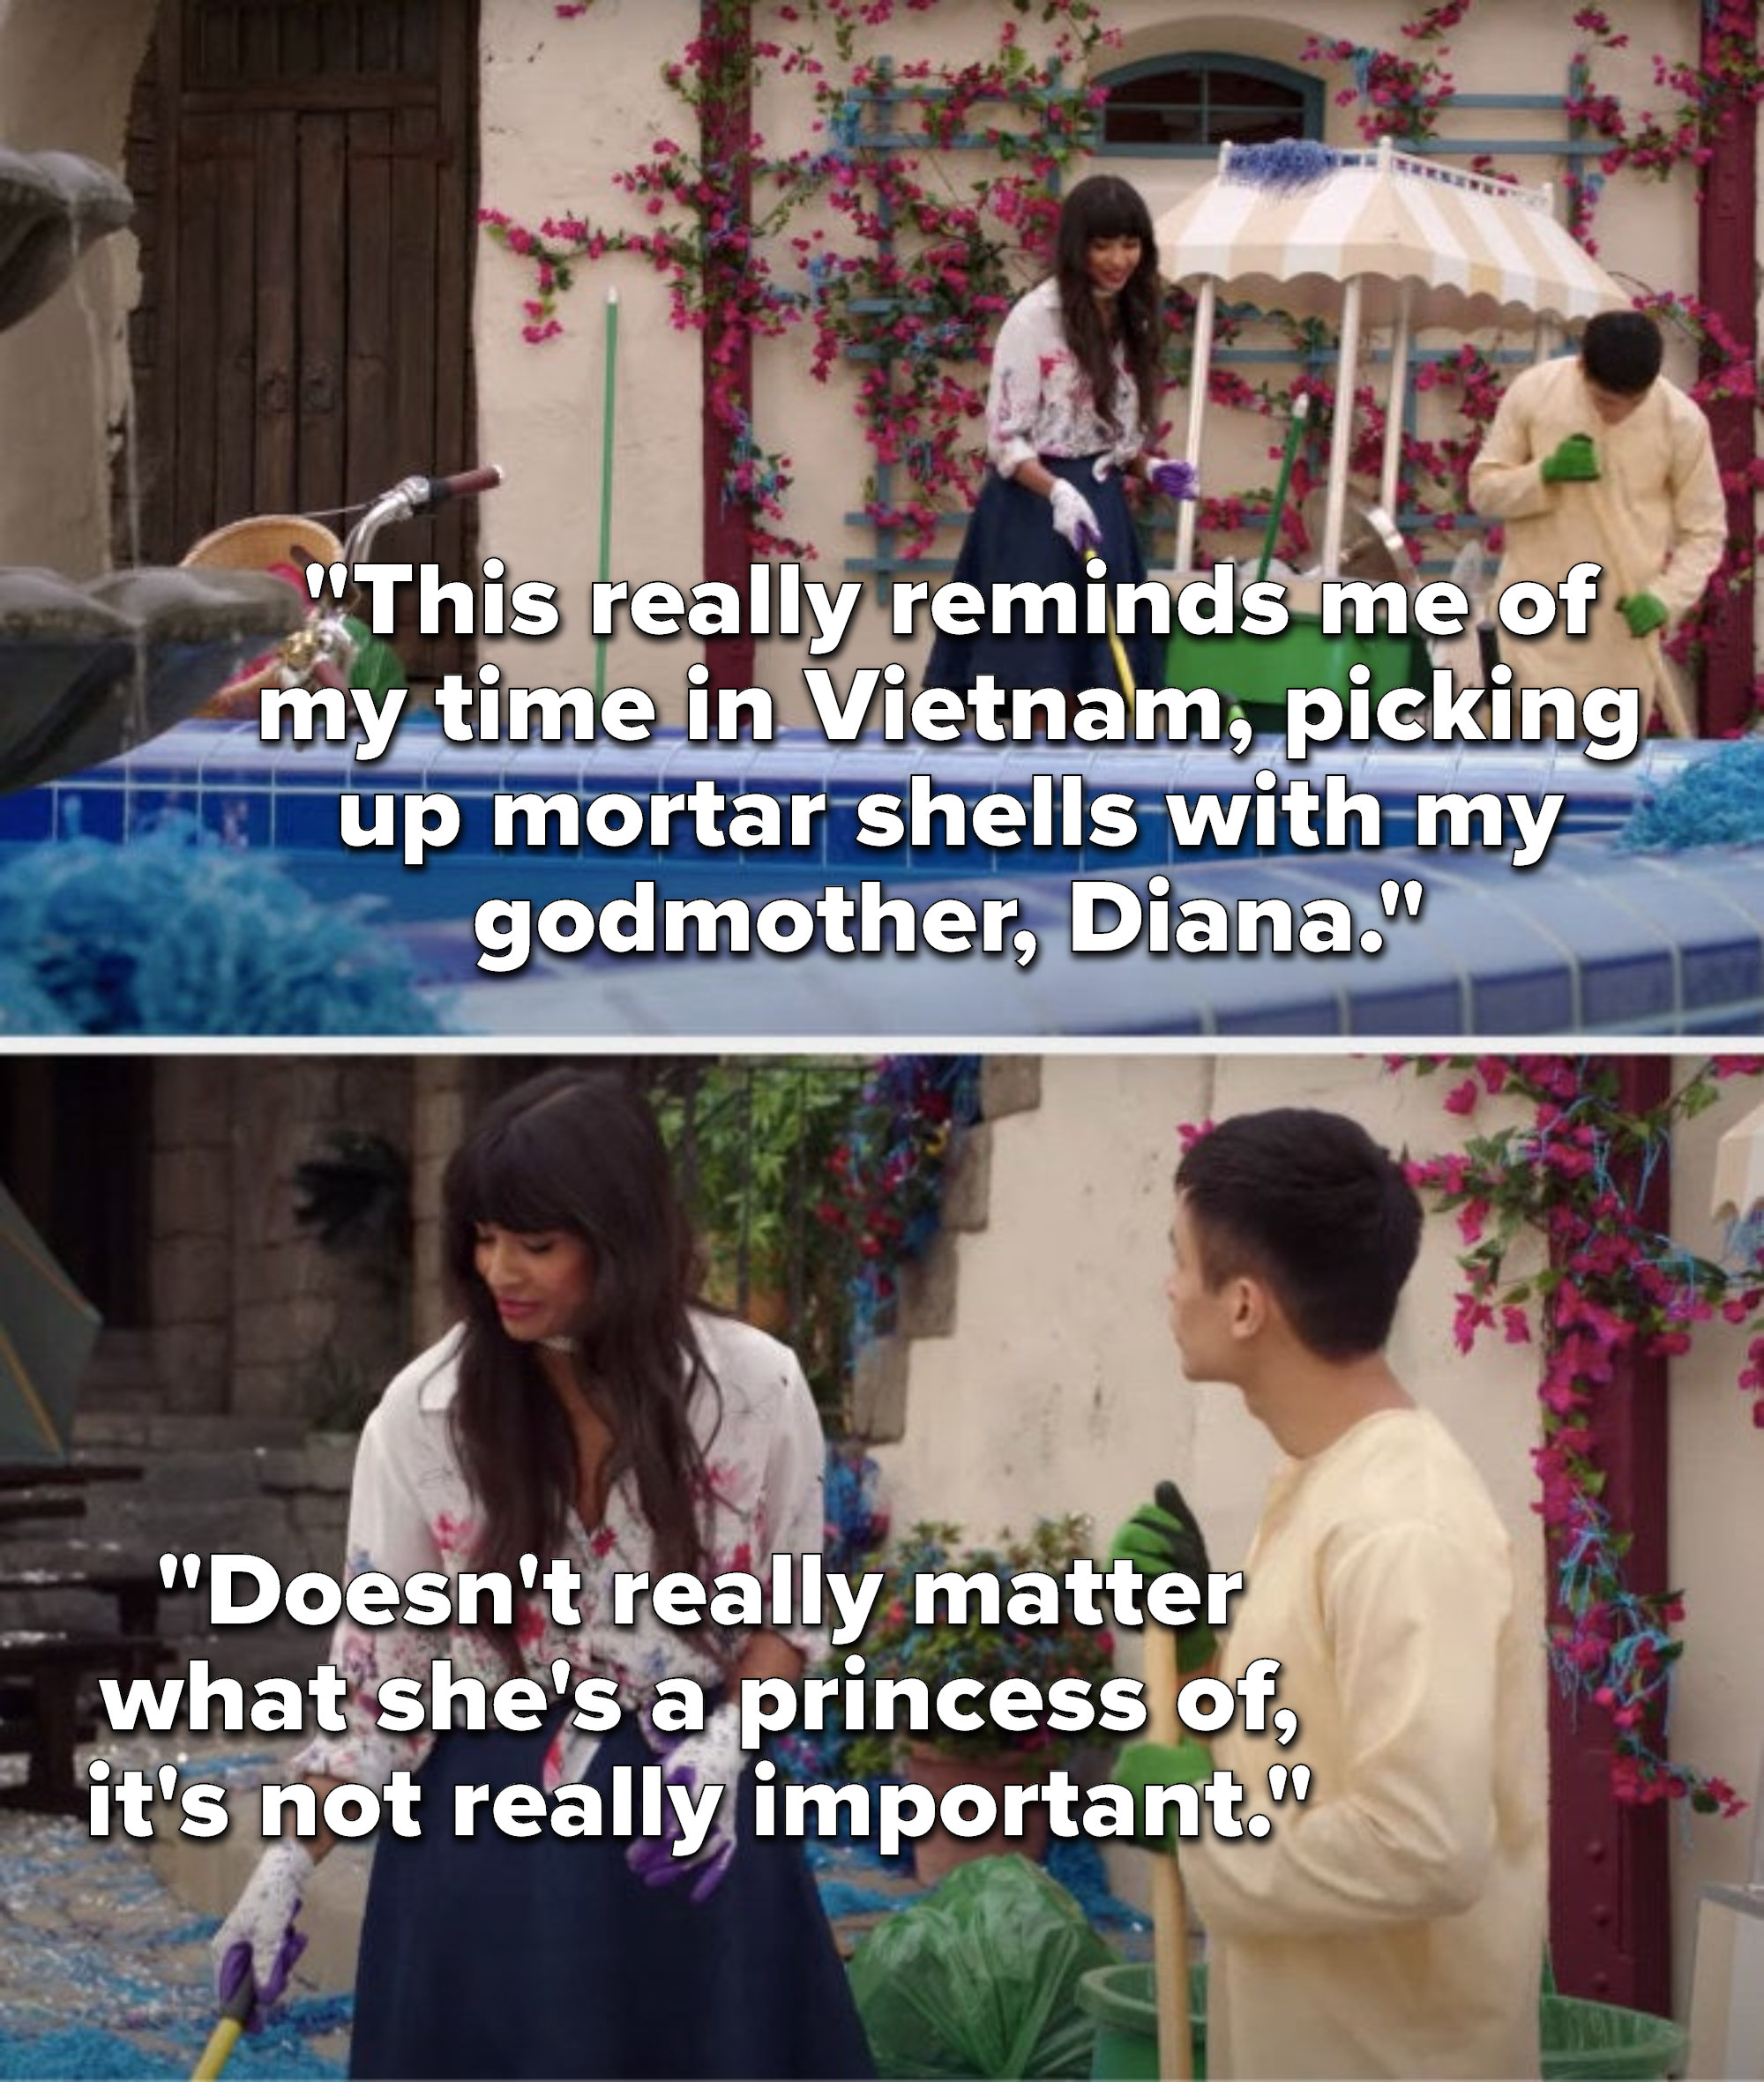 Tahani says, This really reminds me of my time in Vietnam, picking up mortar shells with my godmother, Diana, doesn&#x27;t really matter what she&#x27;s a princess of, it&#x27;s not really important